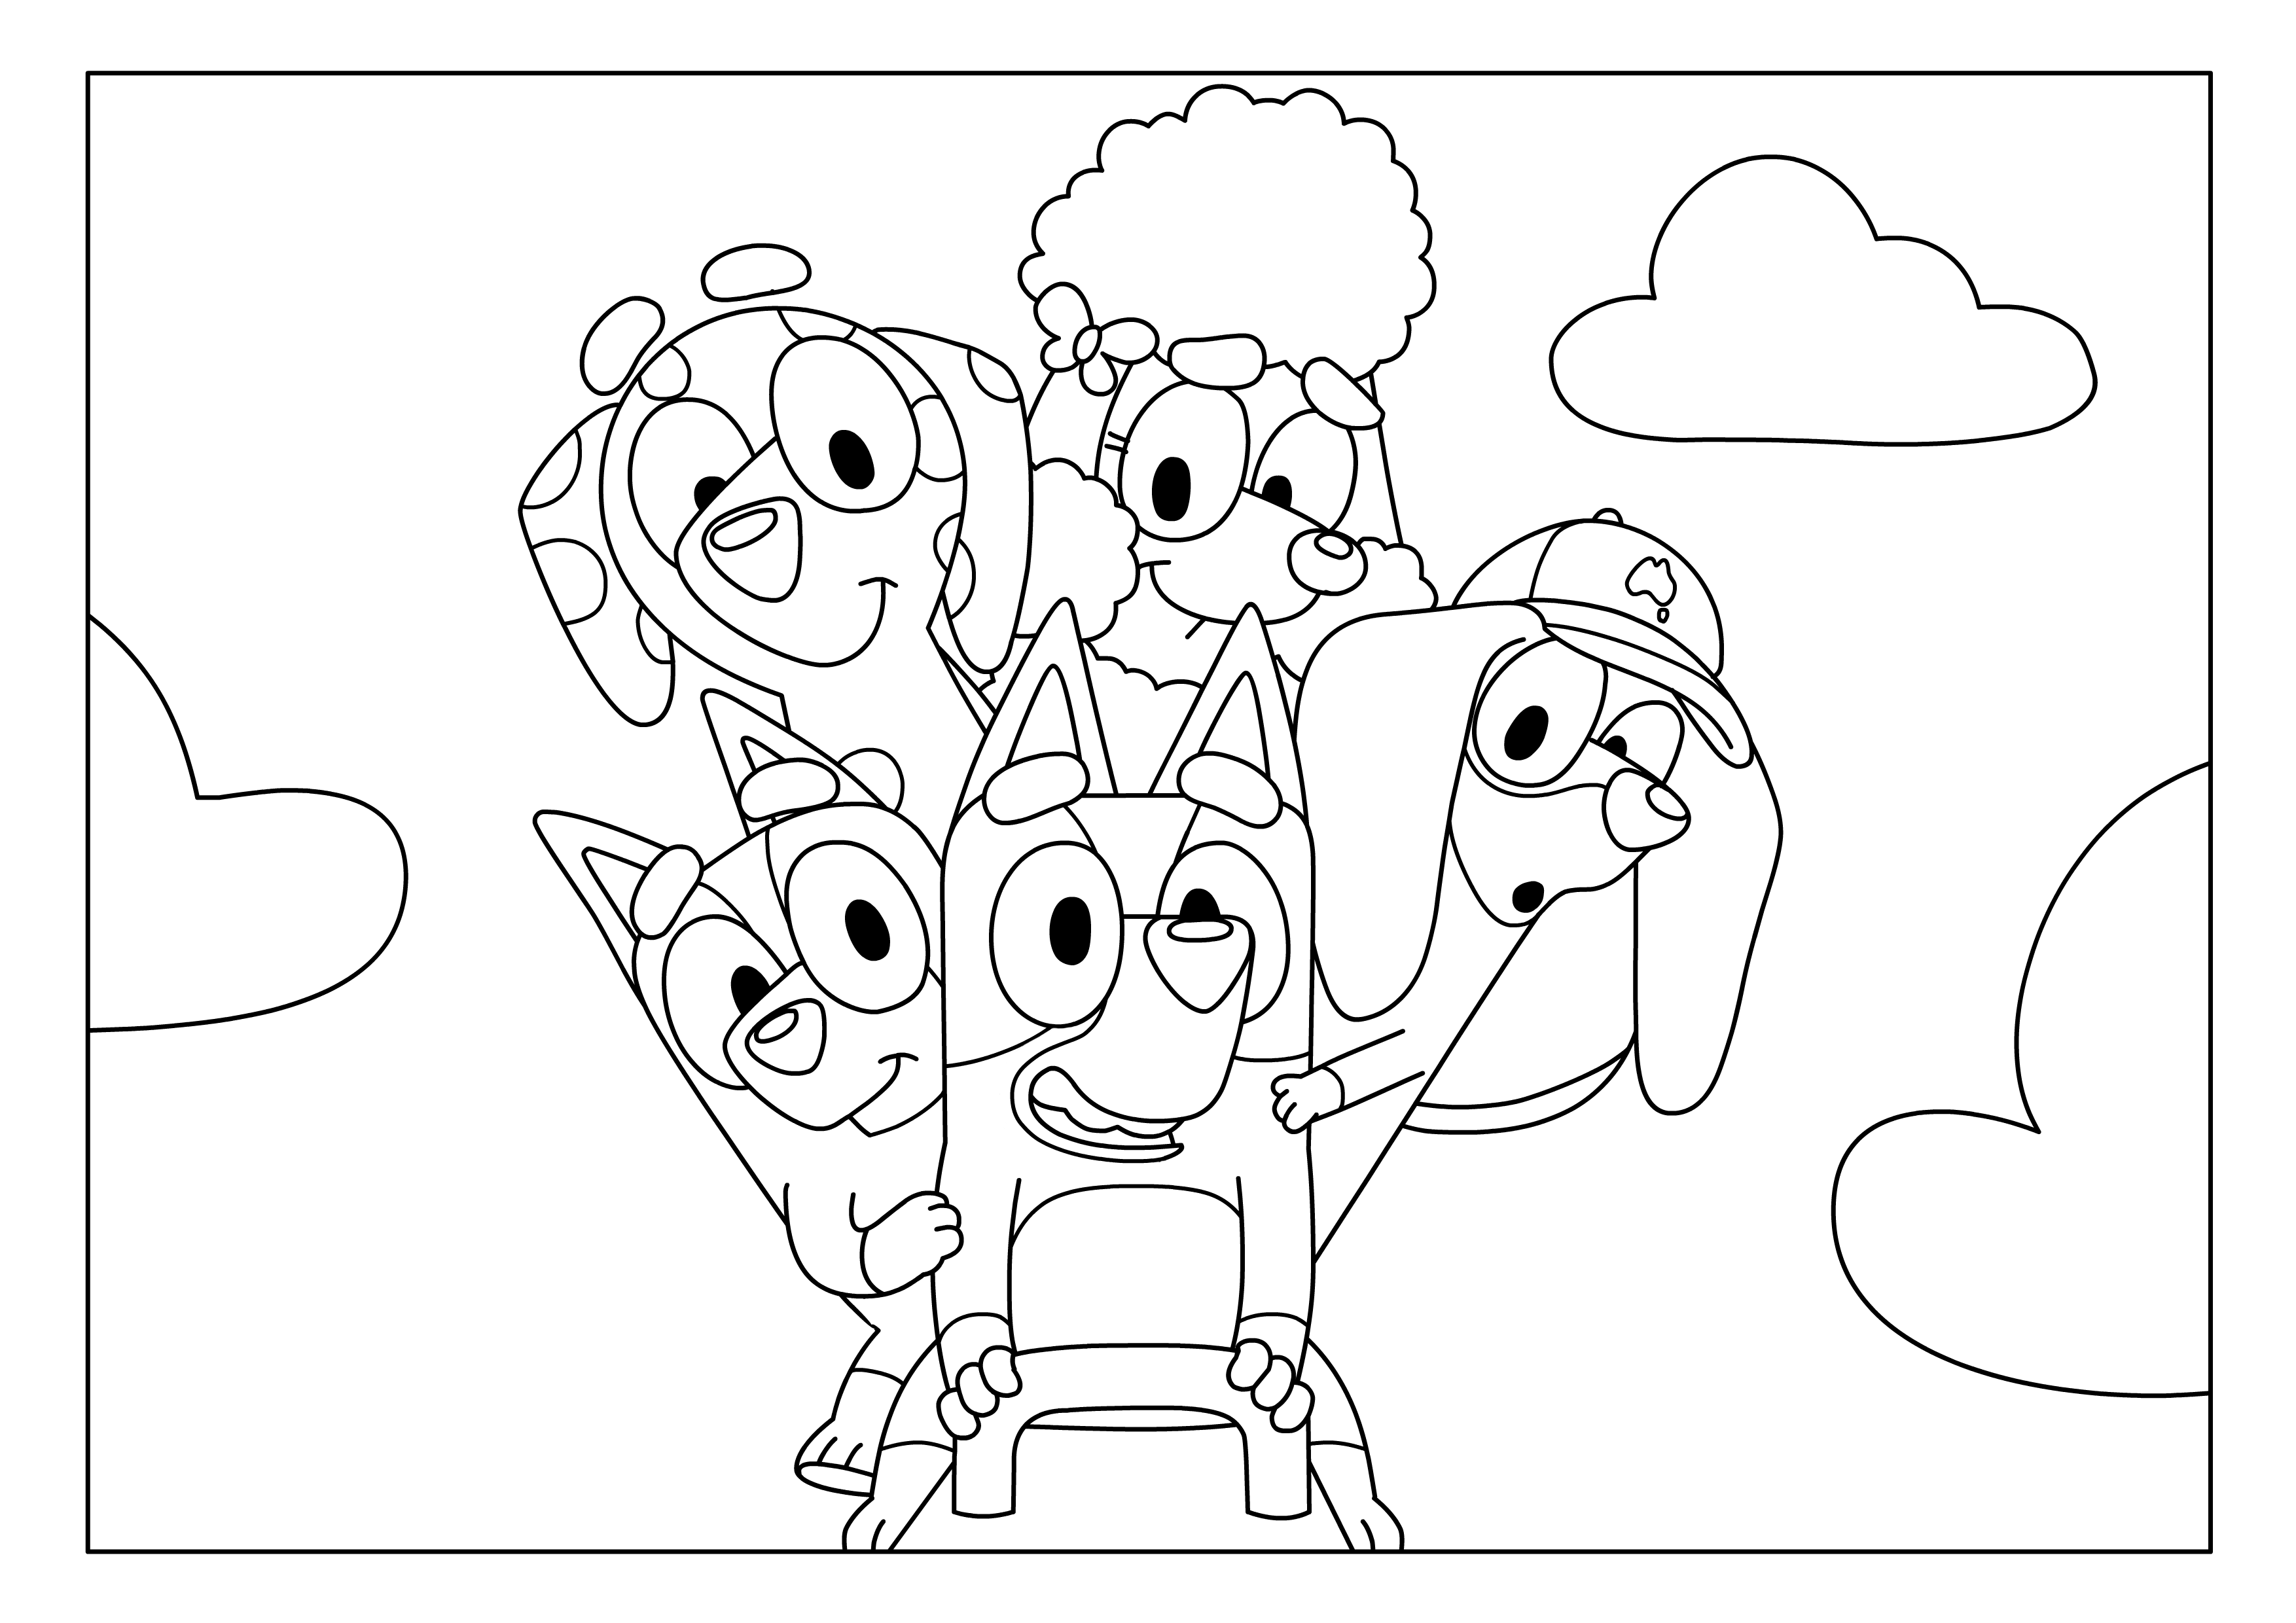 Bluey friends colouring sheets - Bluey Official Website